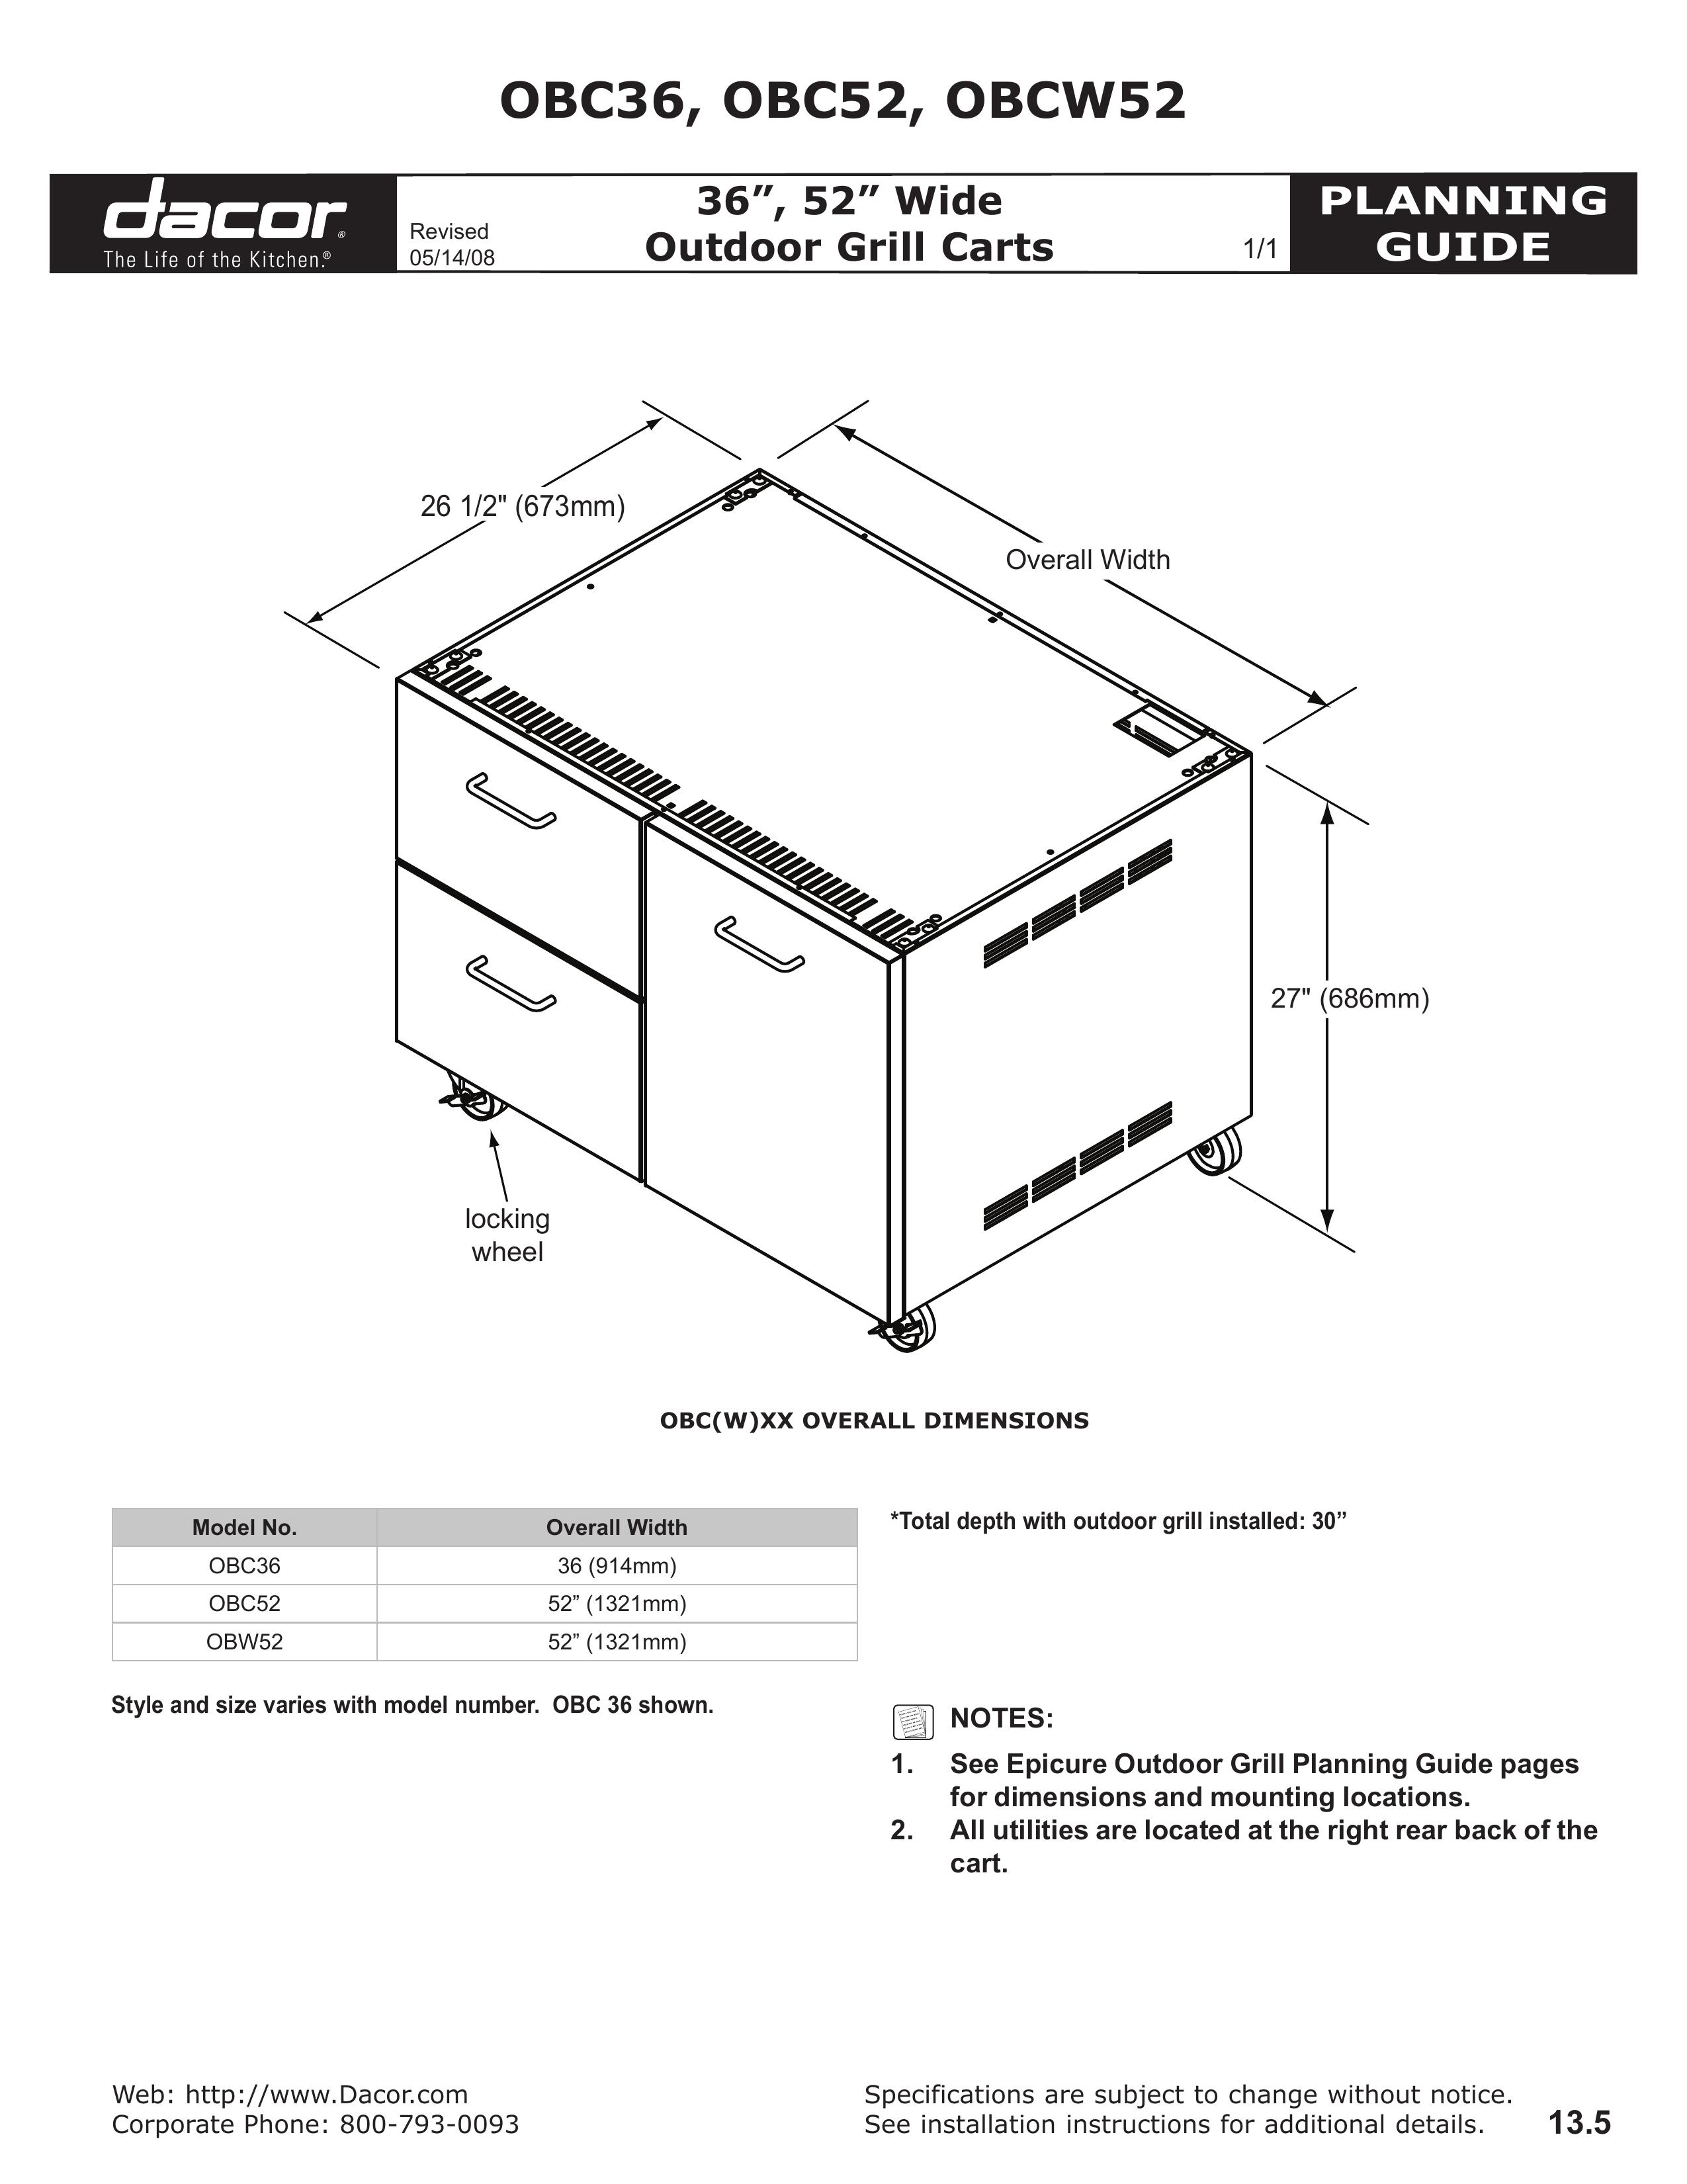 Dacor OBC52 Gas Grill User Manual